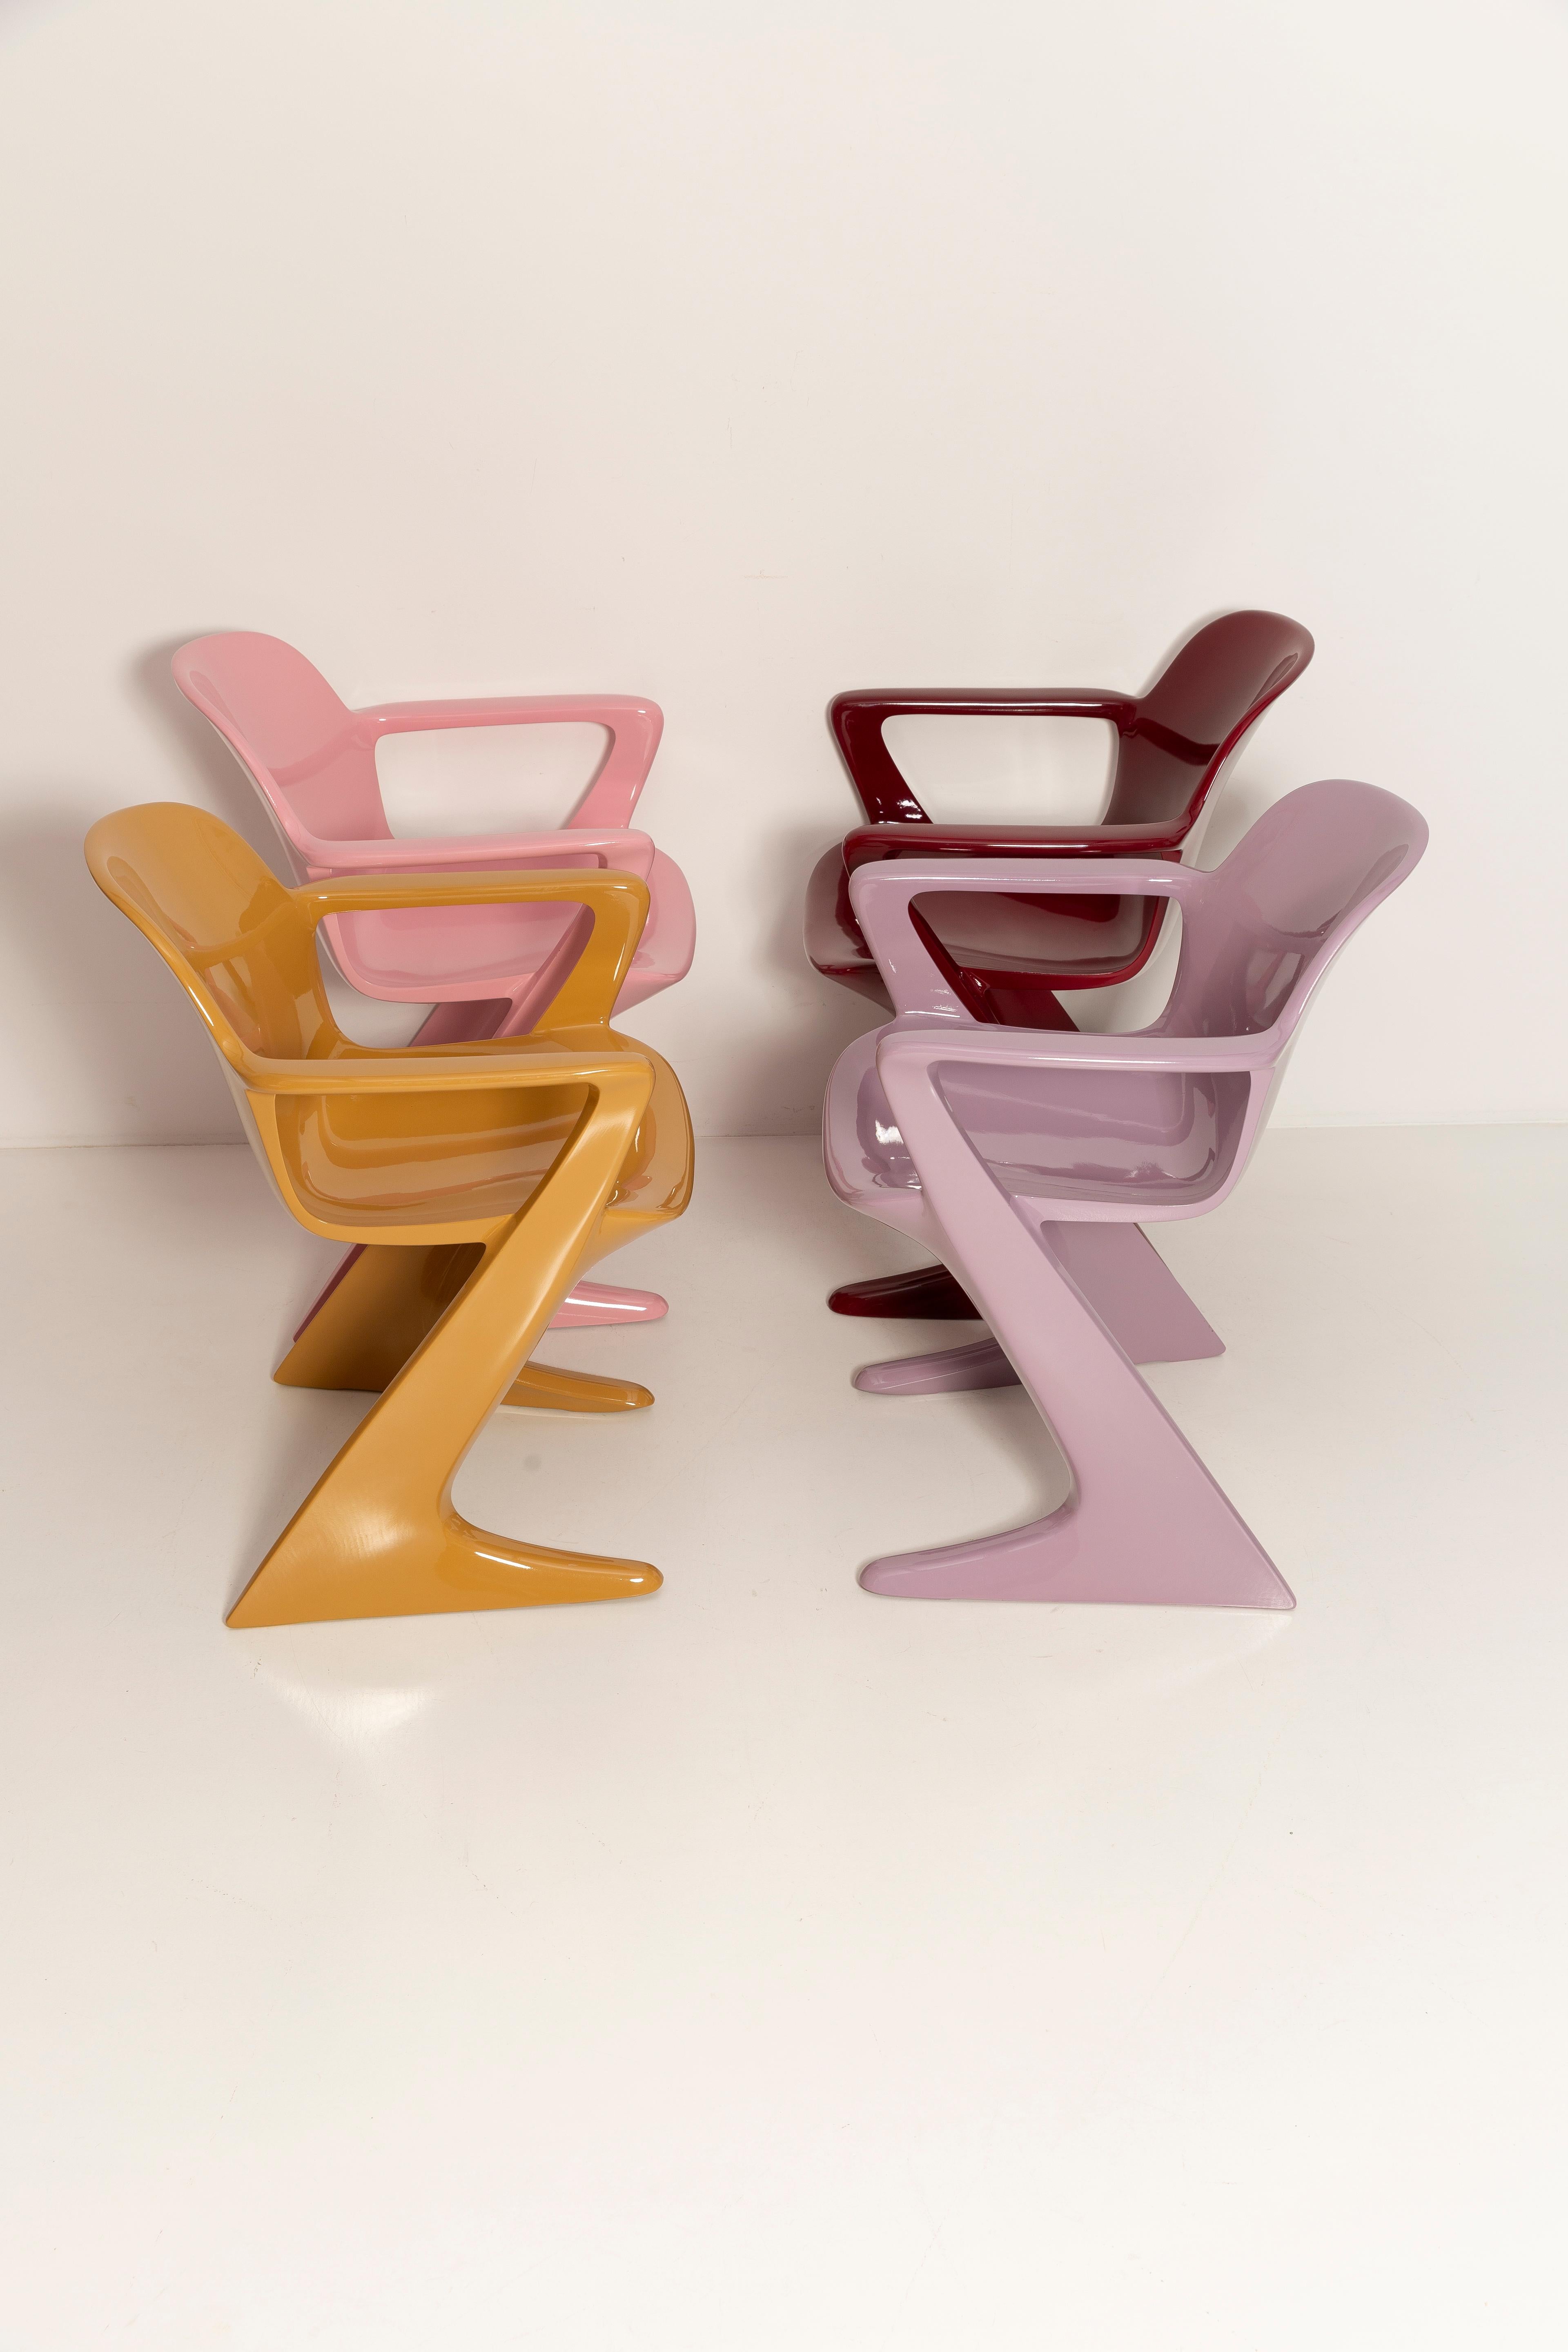 Set of Three Mid Century Kangaroo Chairs, Ernst Moeckl, Germany, 1968 For Sale 4